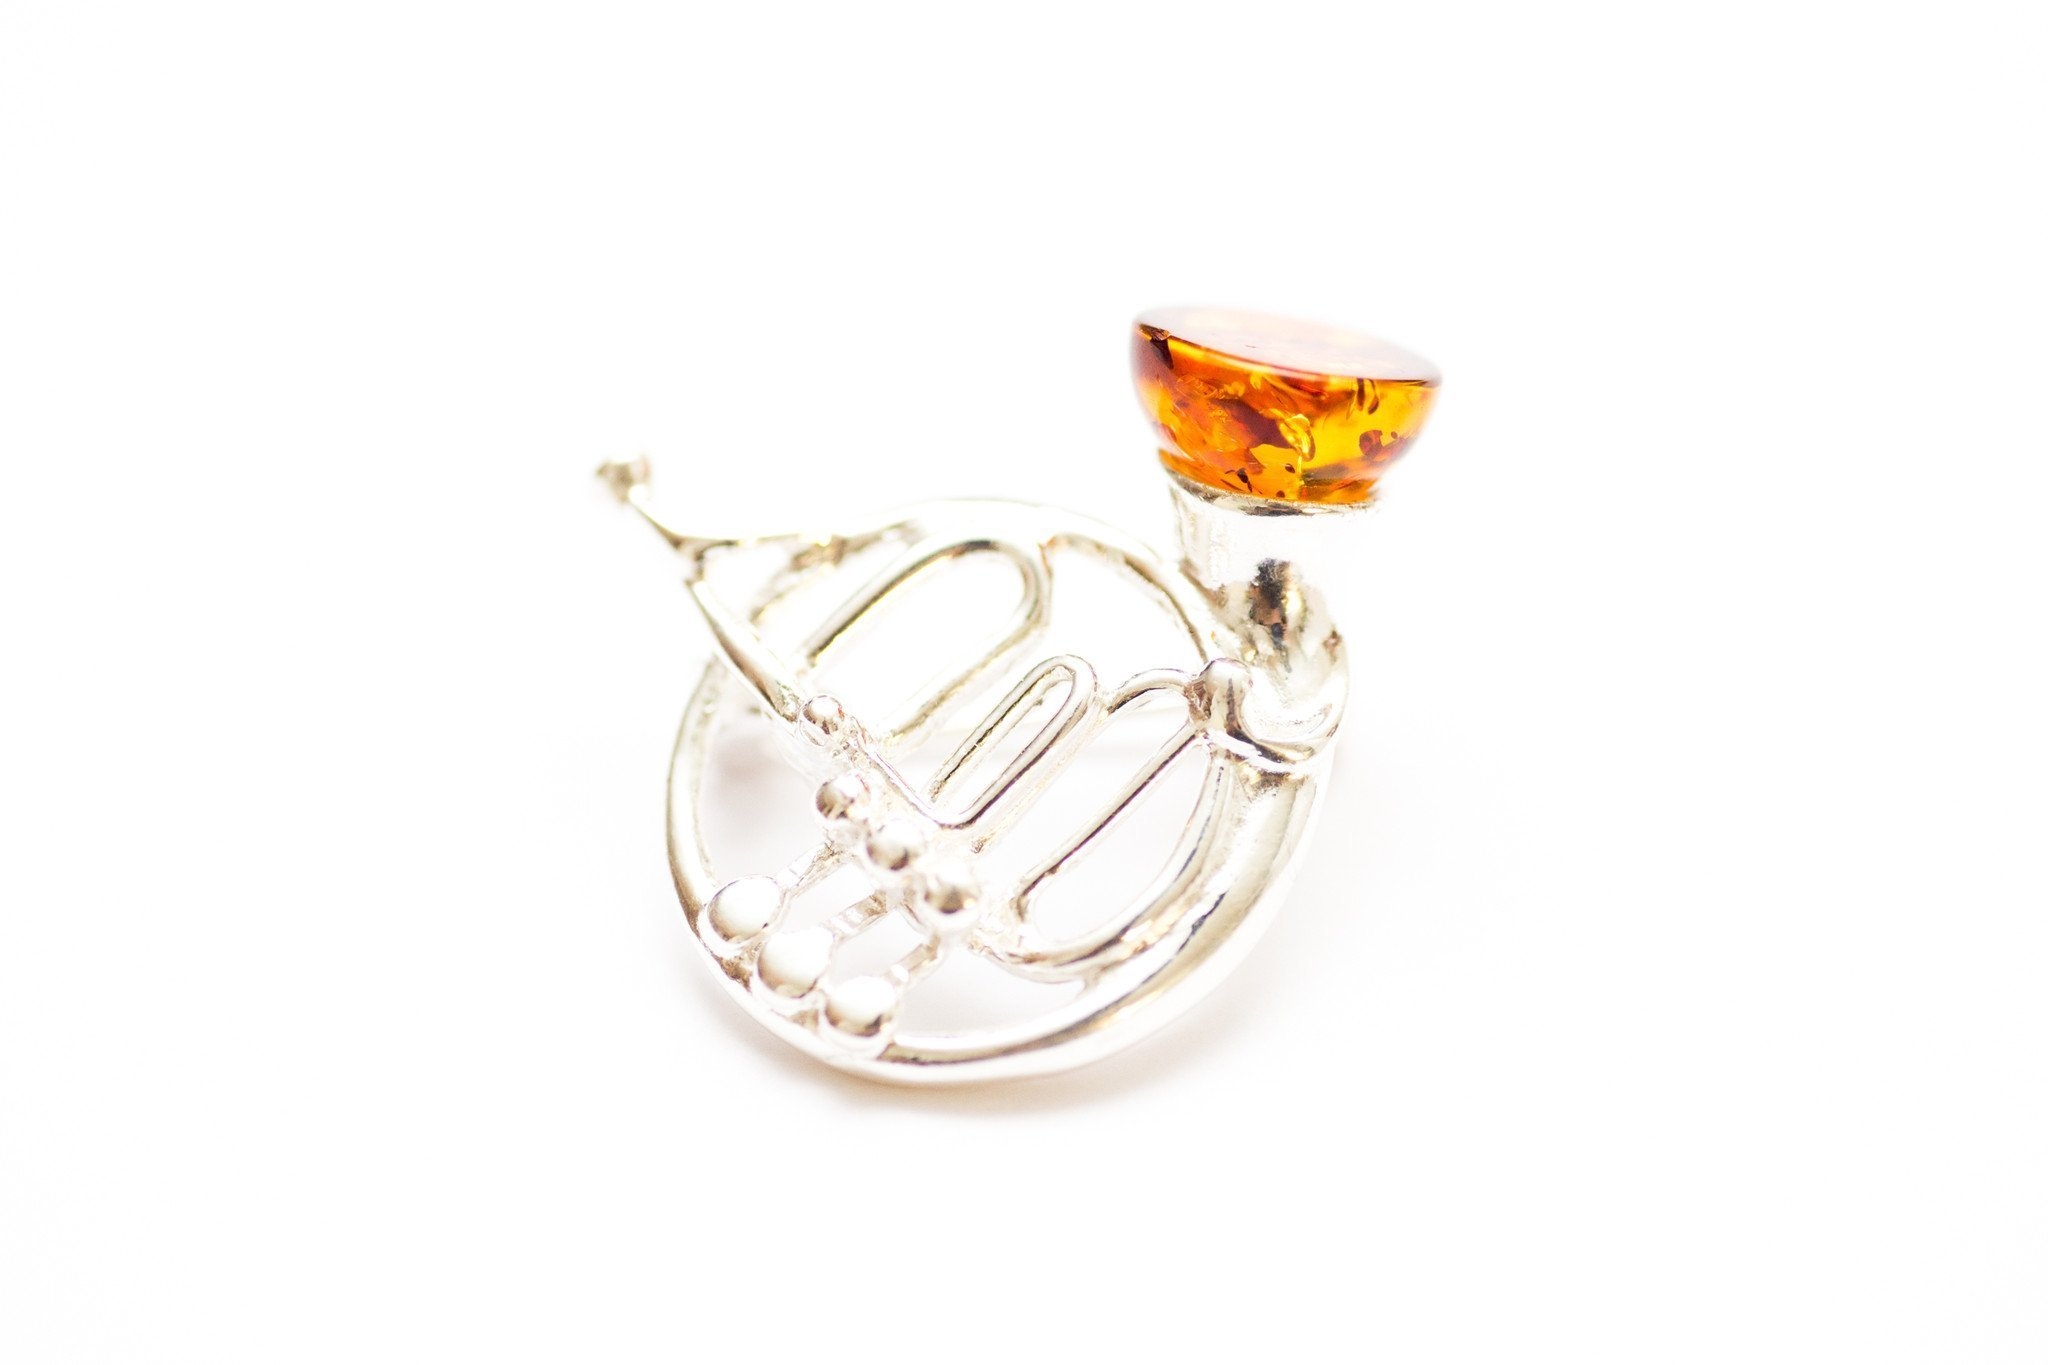 French Horn Amber Brooch – Amber